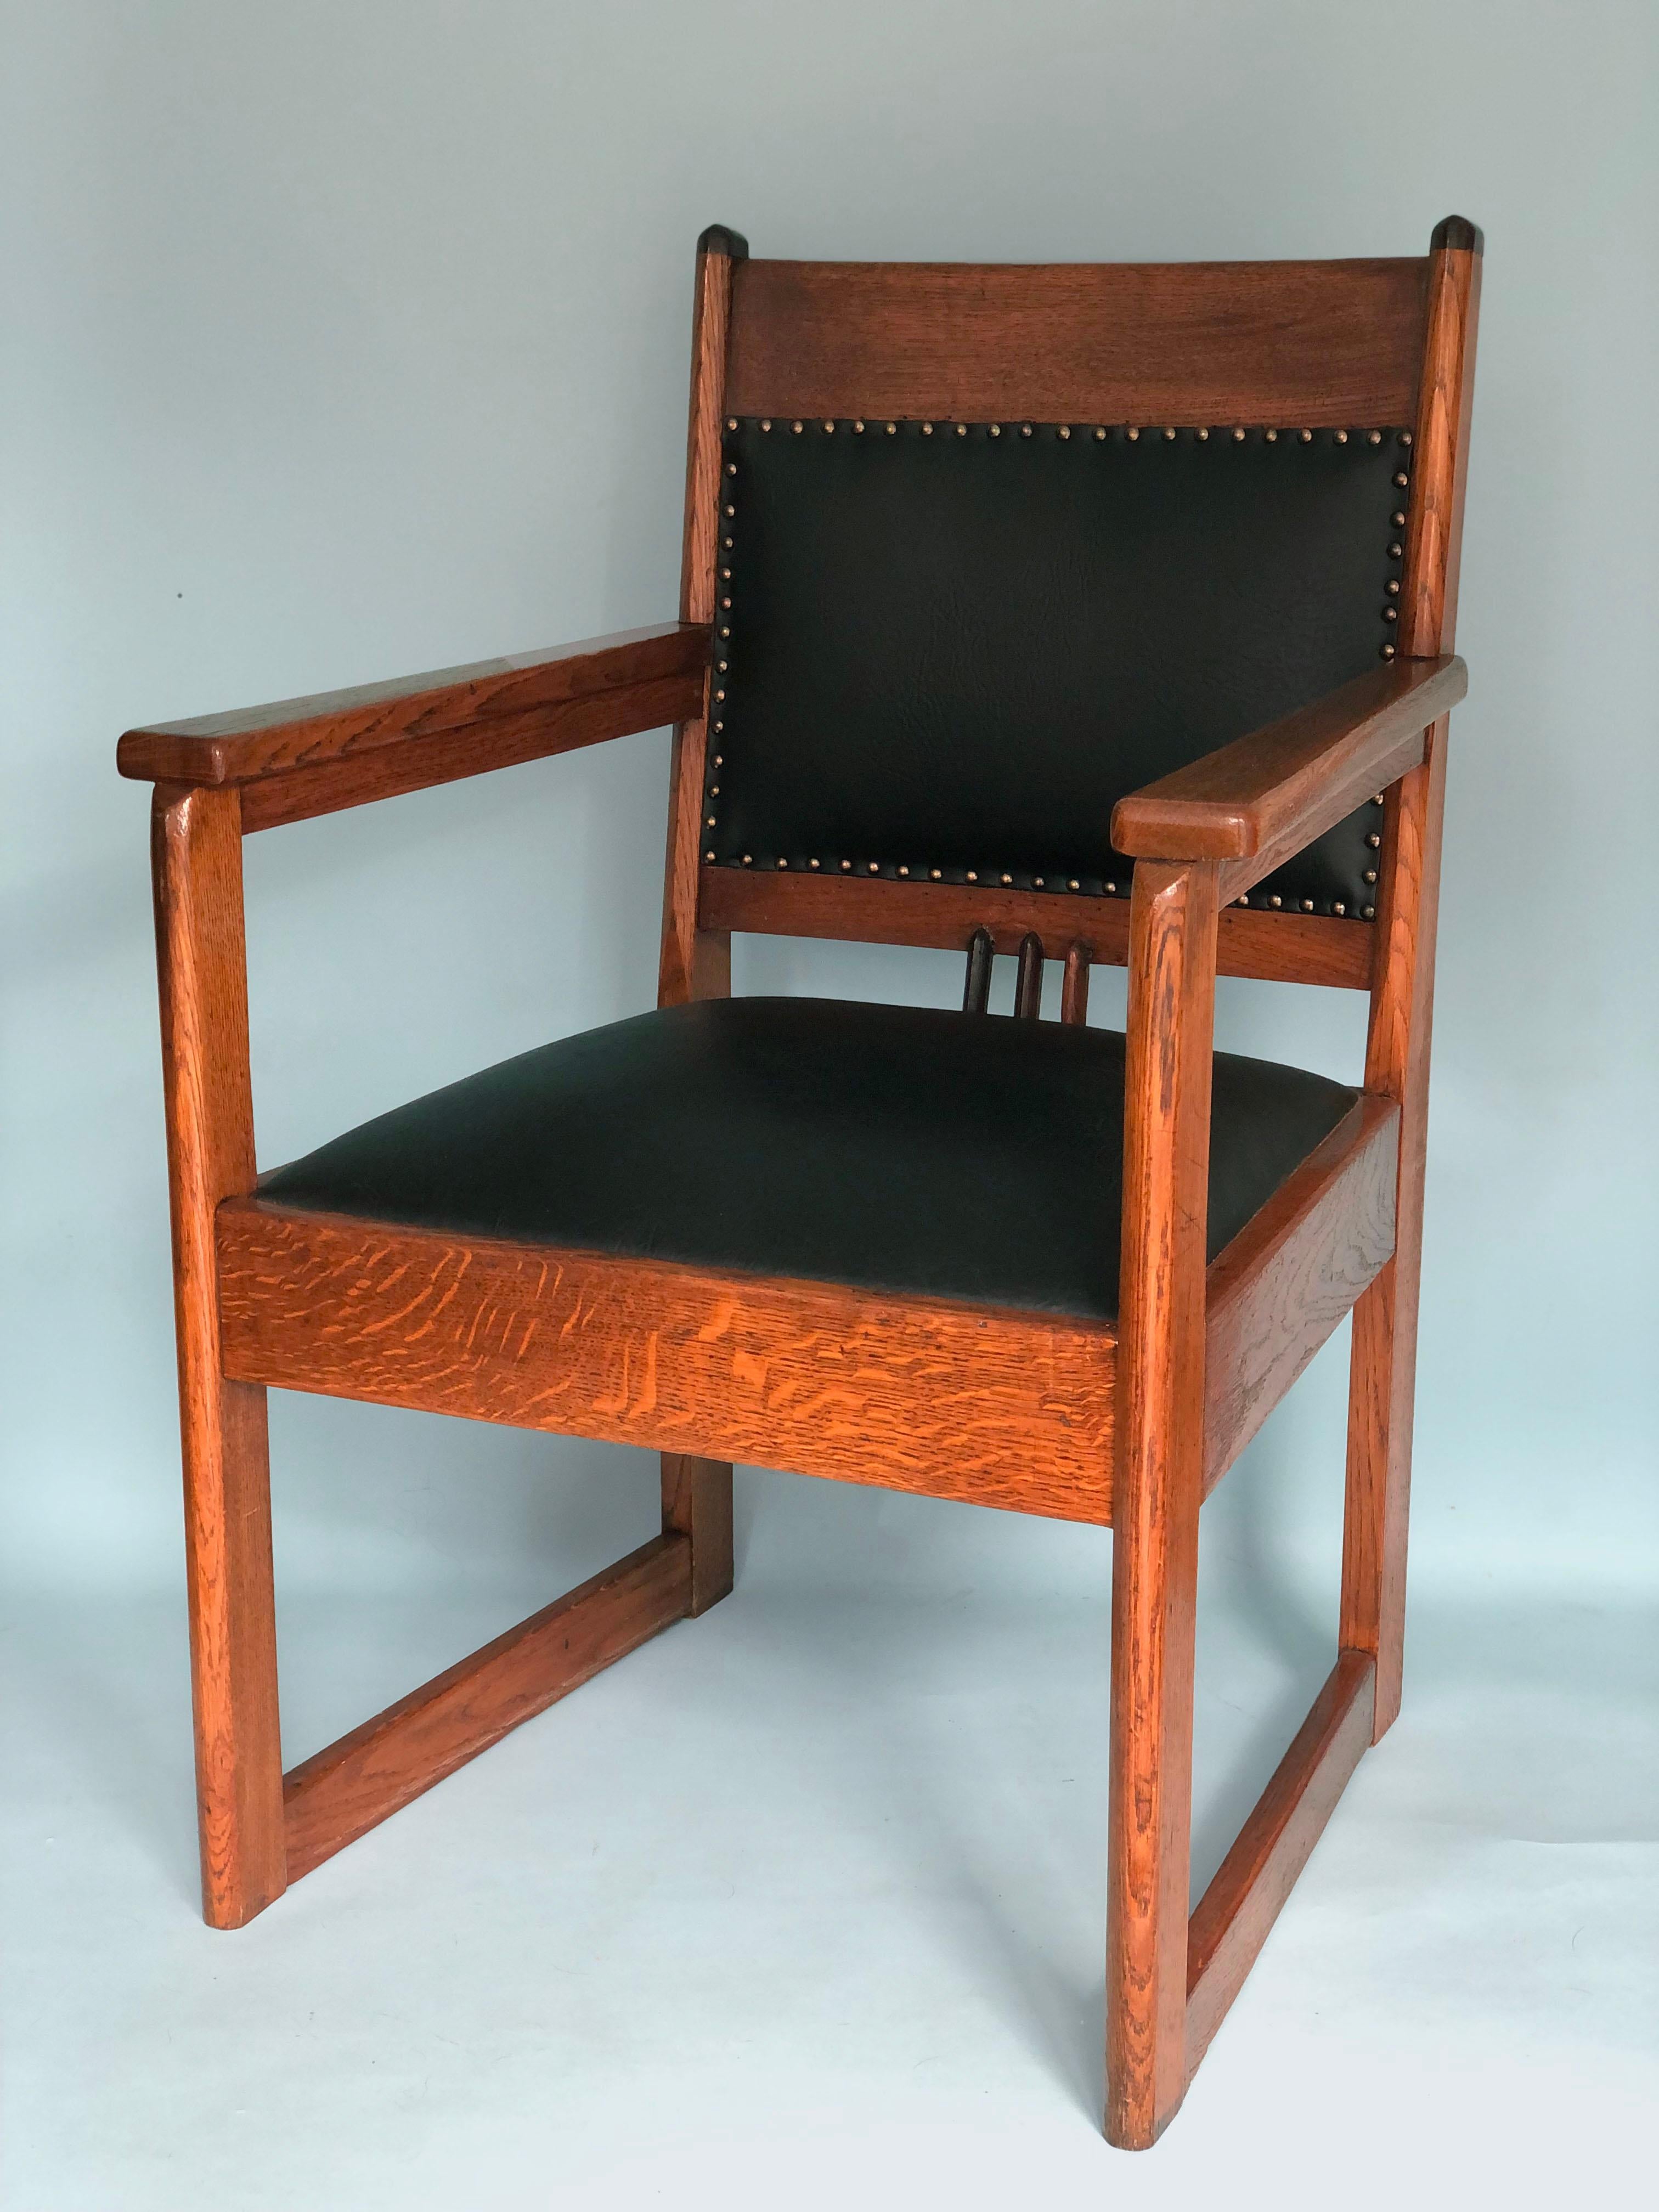 2 oak Art Deco armchairs from the 1920s. Designed and made during the Haagse School period, probably Hendrik Wouda. The heavy and sturdy chairs are in very good condition. The imitation leather on the seat and back is attached with upholstery nails.